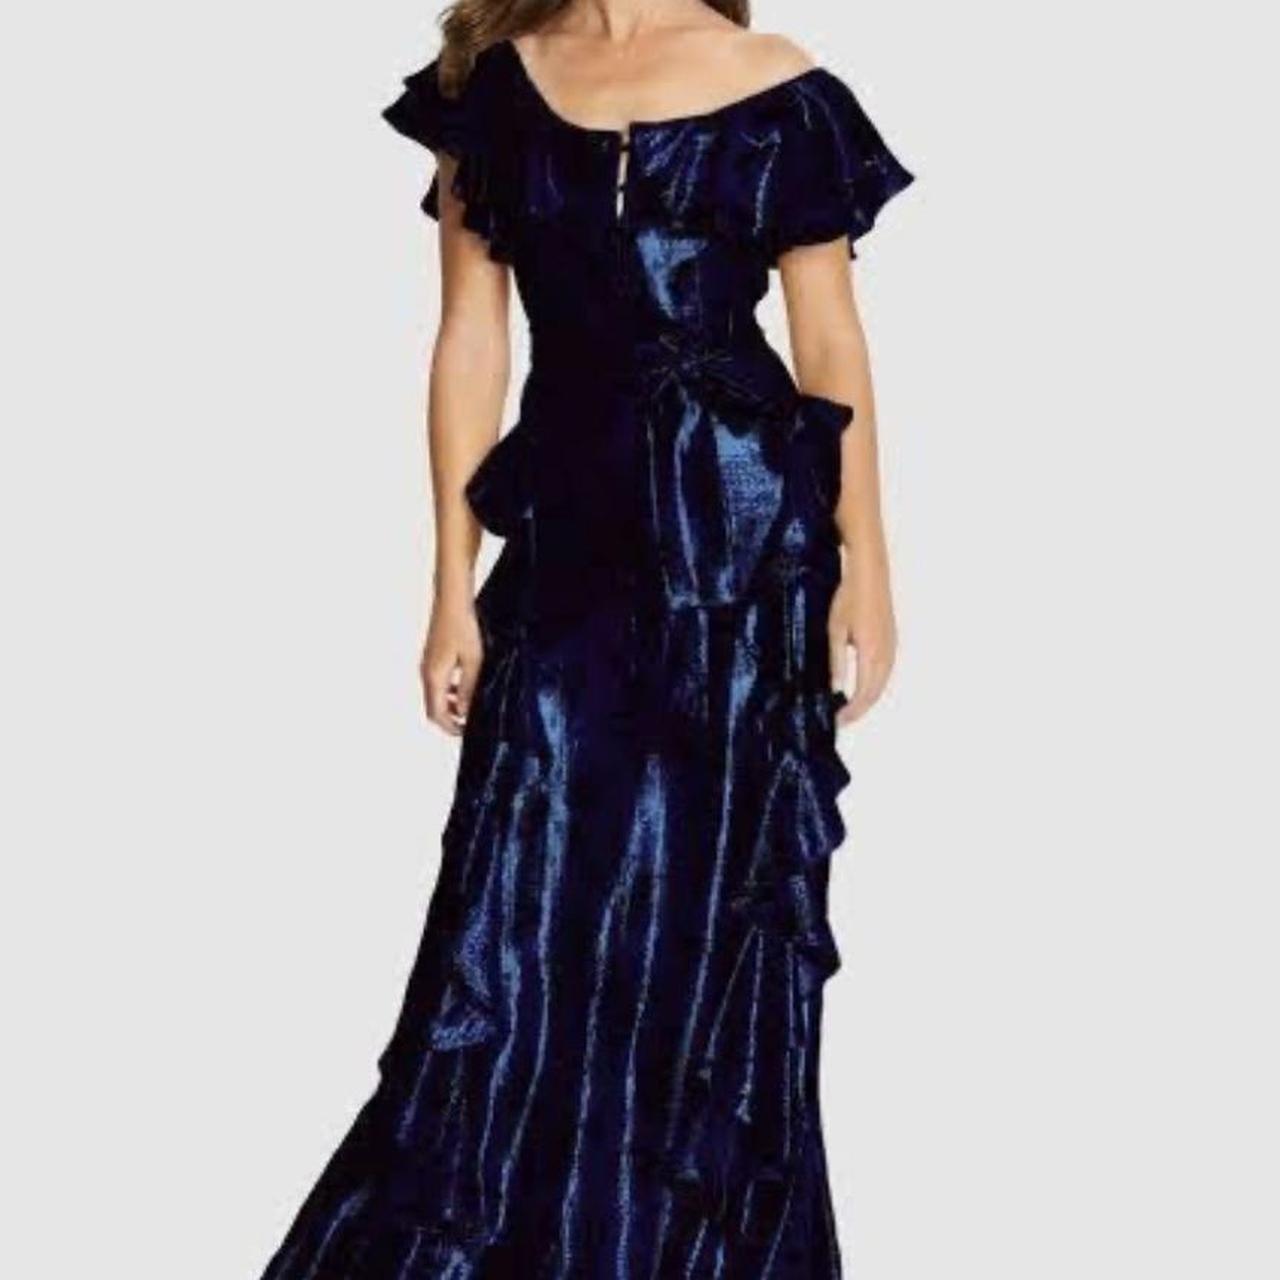 Alice McCall Midnight Moves Indigo Gown Bought:... - Depop